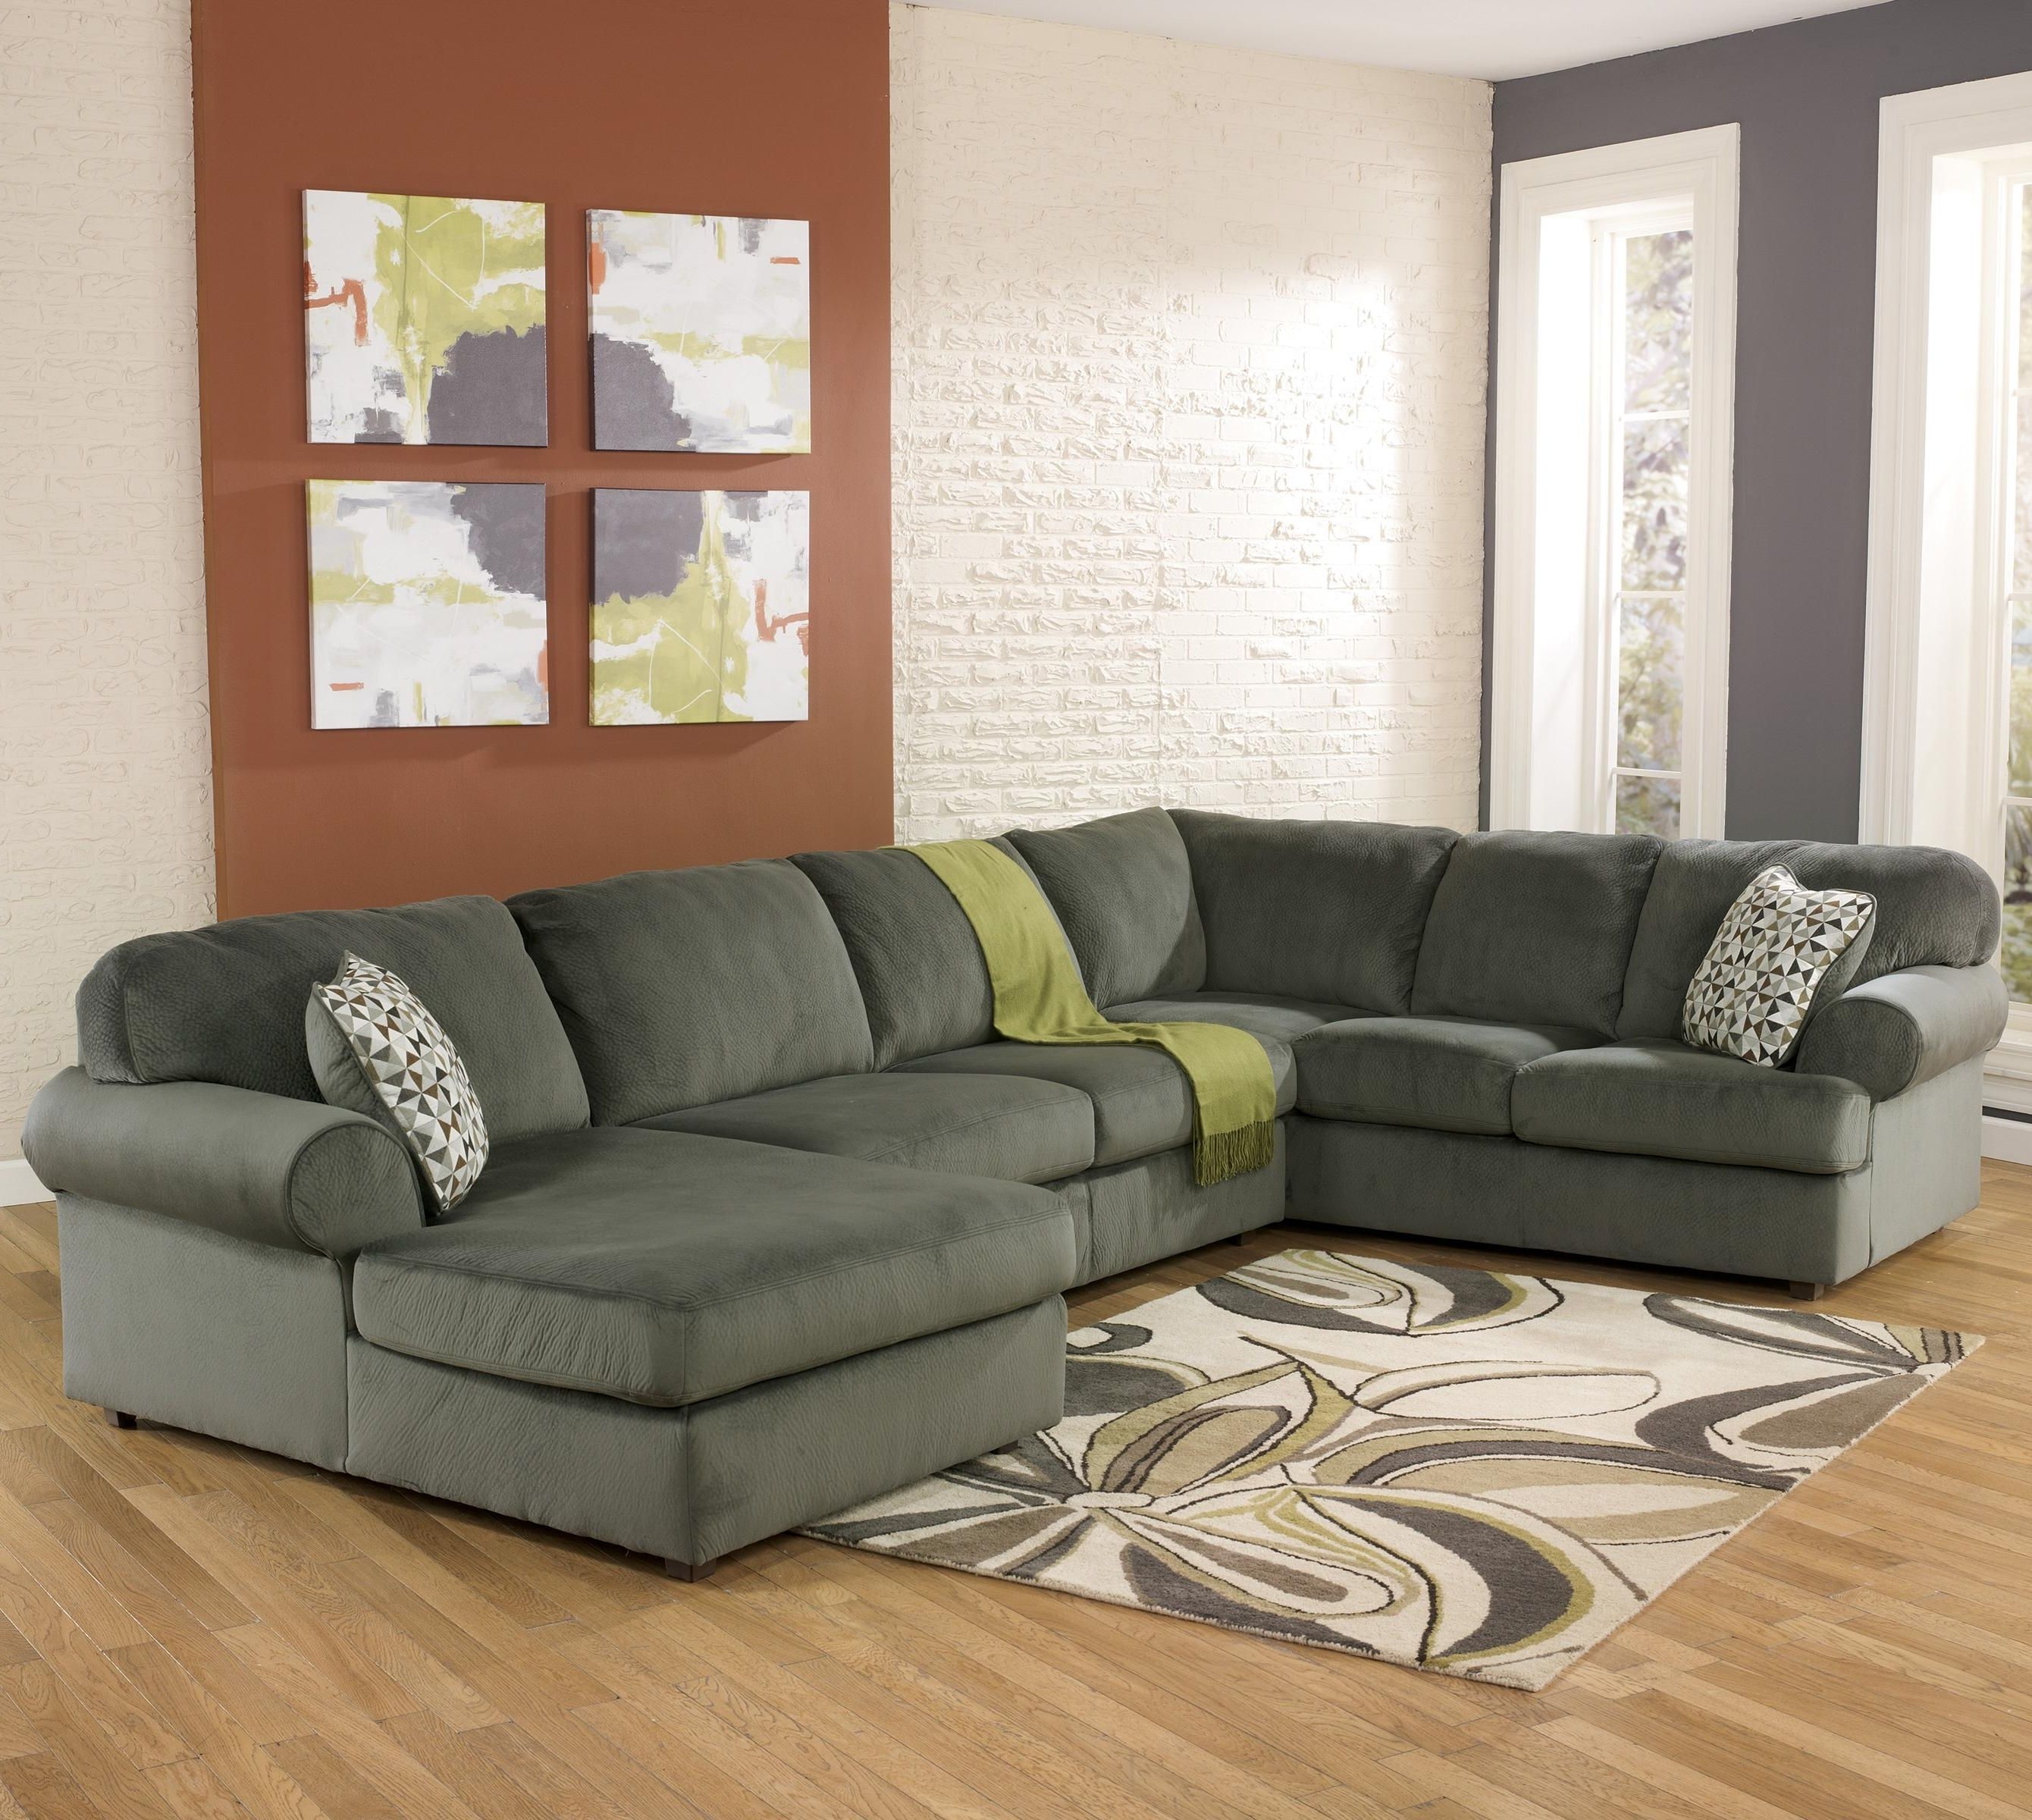 Harrisburg Pa Sectional Sofas For Trendy Casual Sectional Sofa With Right Chaisesignature Design (View 1 of 20)